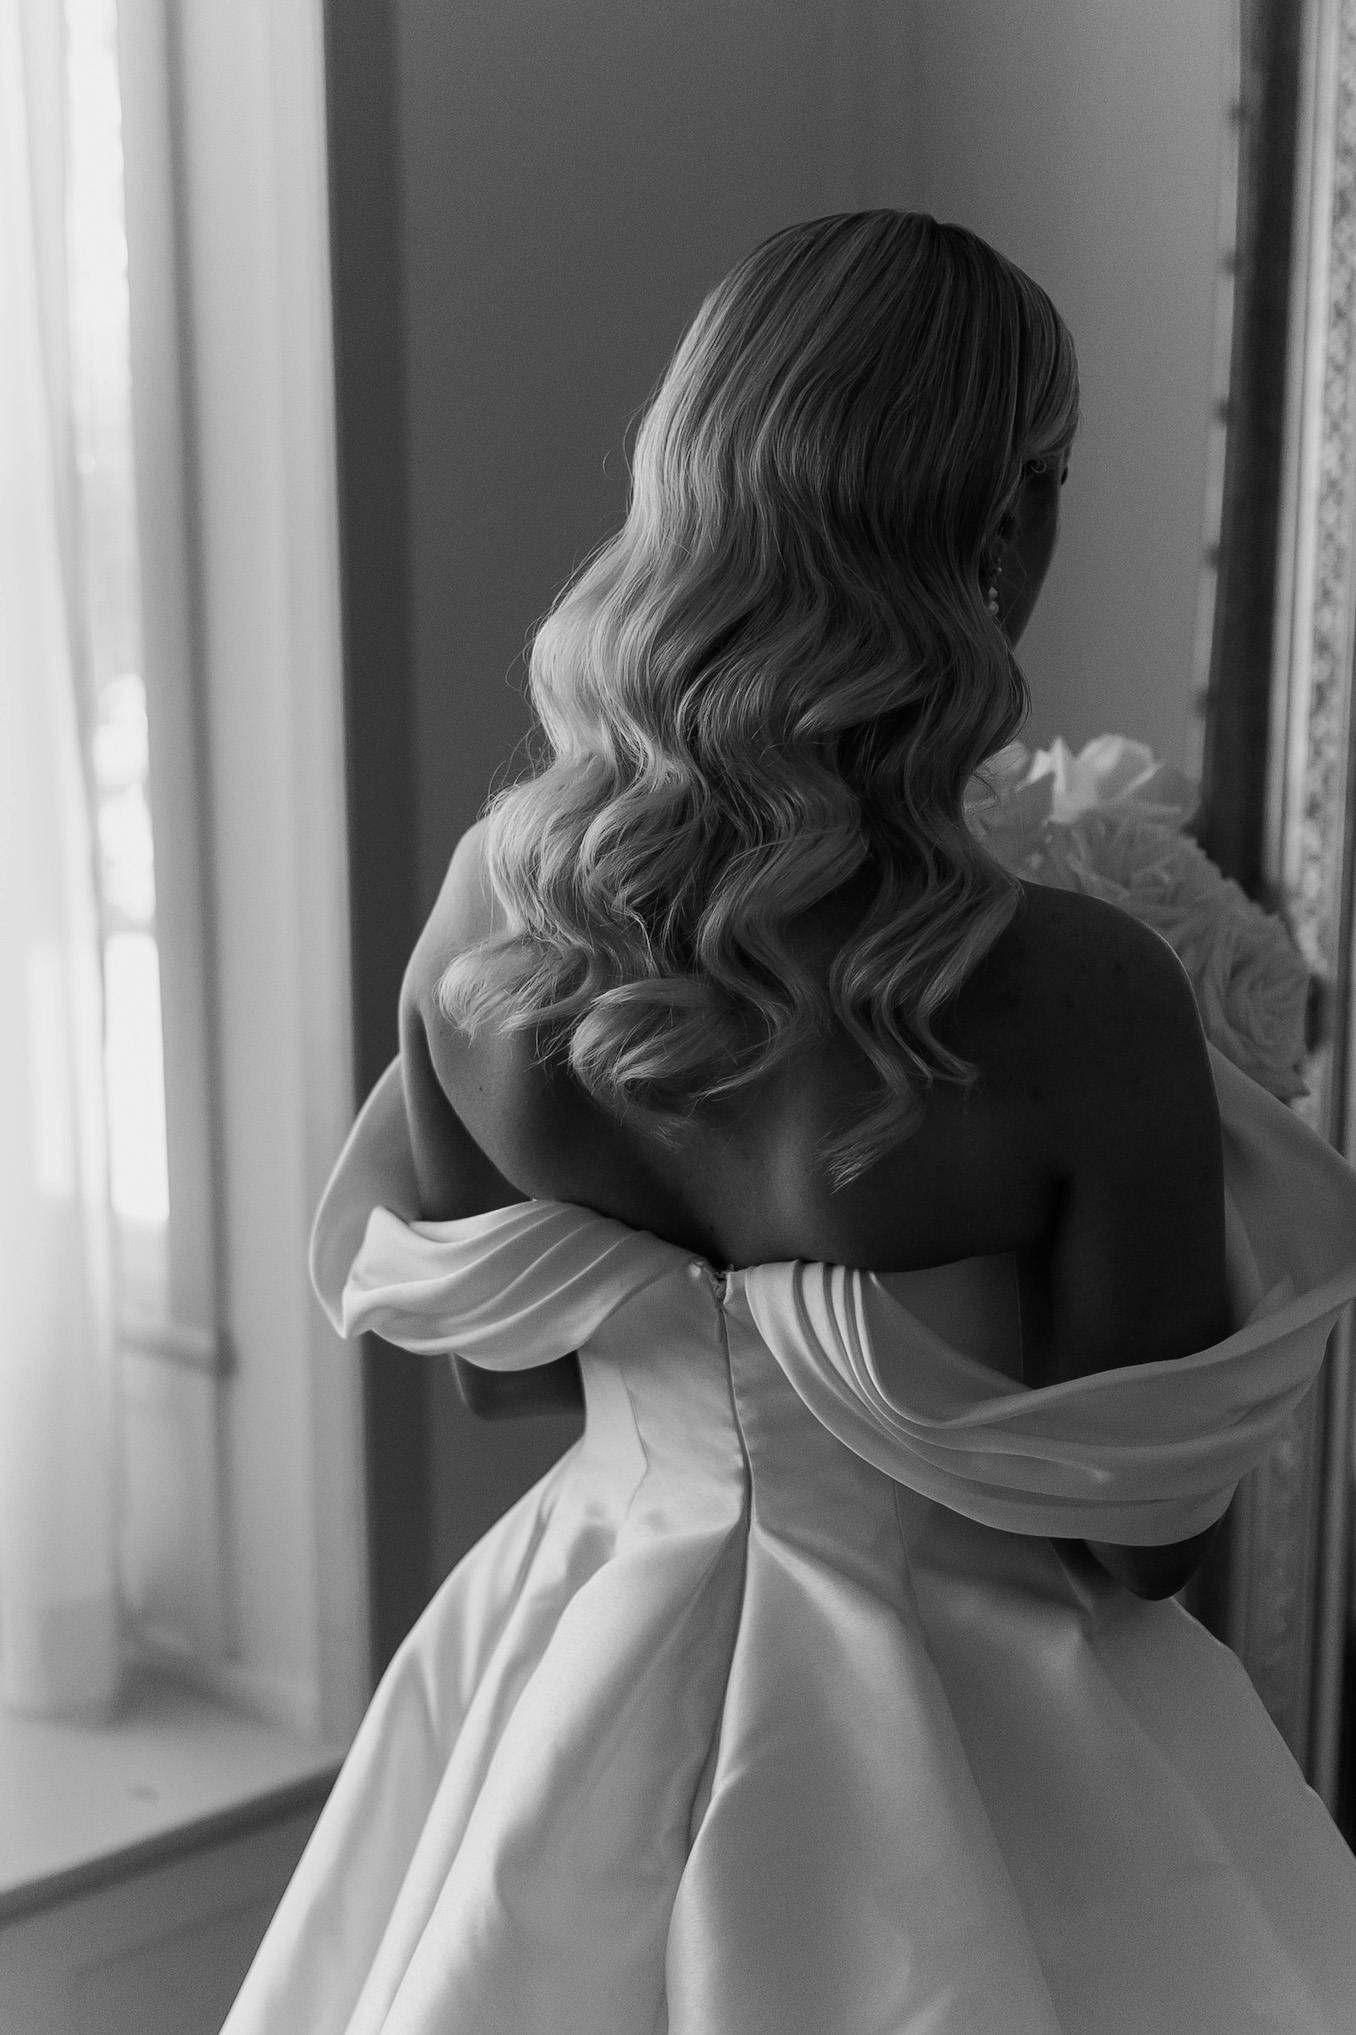 A woman in a white strapless gown with draped off-shoulder details stands near a window, holding a bouquet of flowers. Her long, wavy hair cascades down her back. The image is in black and white, capturing a serene and elegant moment.